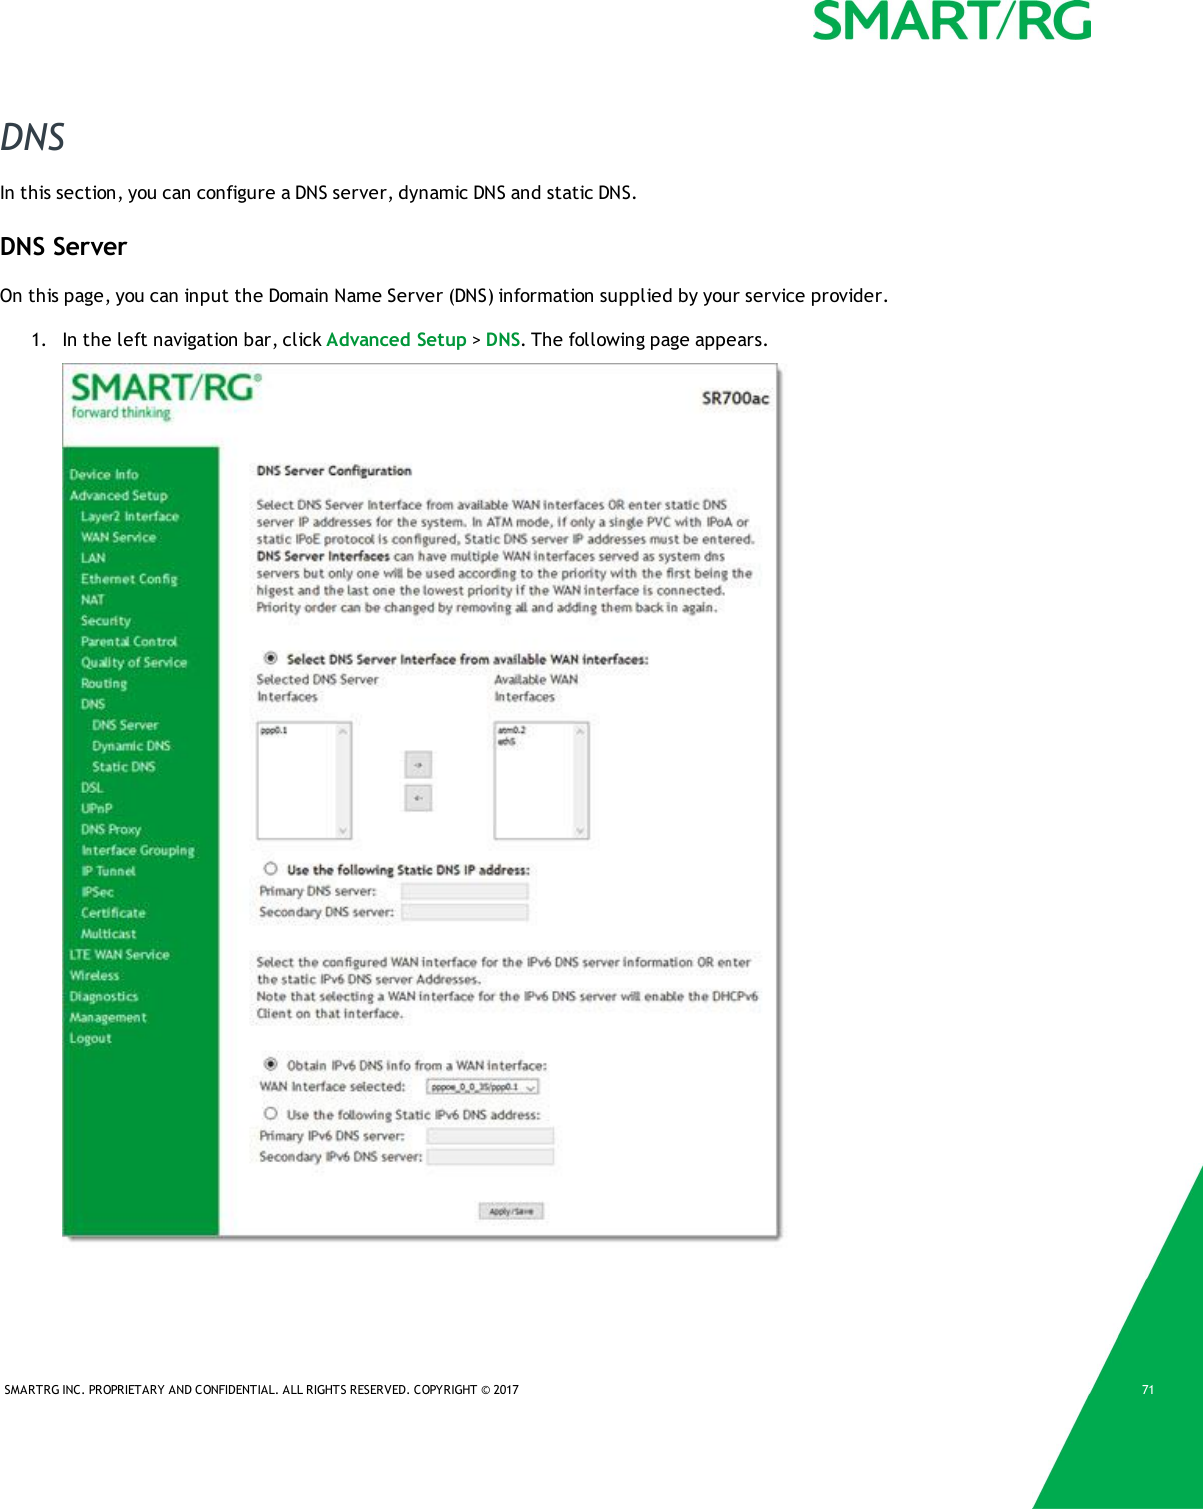 SMARTRG INC. PROPRIETARY AND CONFIDENTIAL. ALL RIGHTS RESERVED. COPYRIGHT © 2017 71DNSIn this section, you can configure a DNS server, dynamic DNS and static DNS.DNS ServerOn this page, you can input the Domain Name Server (DNS) information supplied by your service provider.1. In the left navigation bar, click Advanced Setup &gt;DNS. The following page appears.